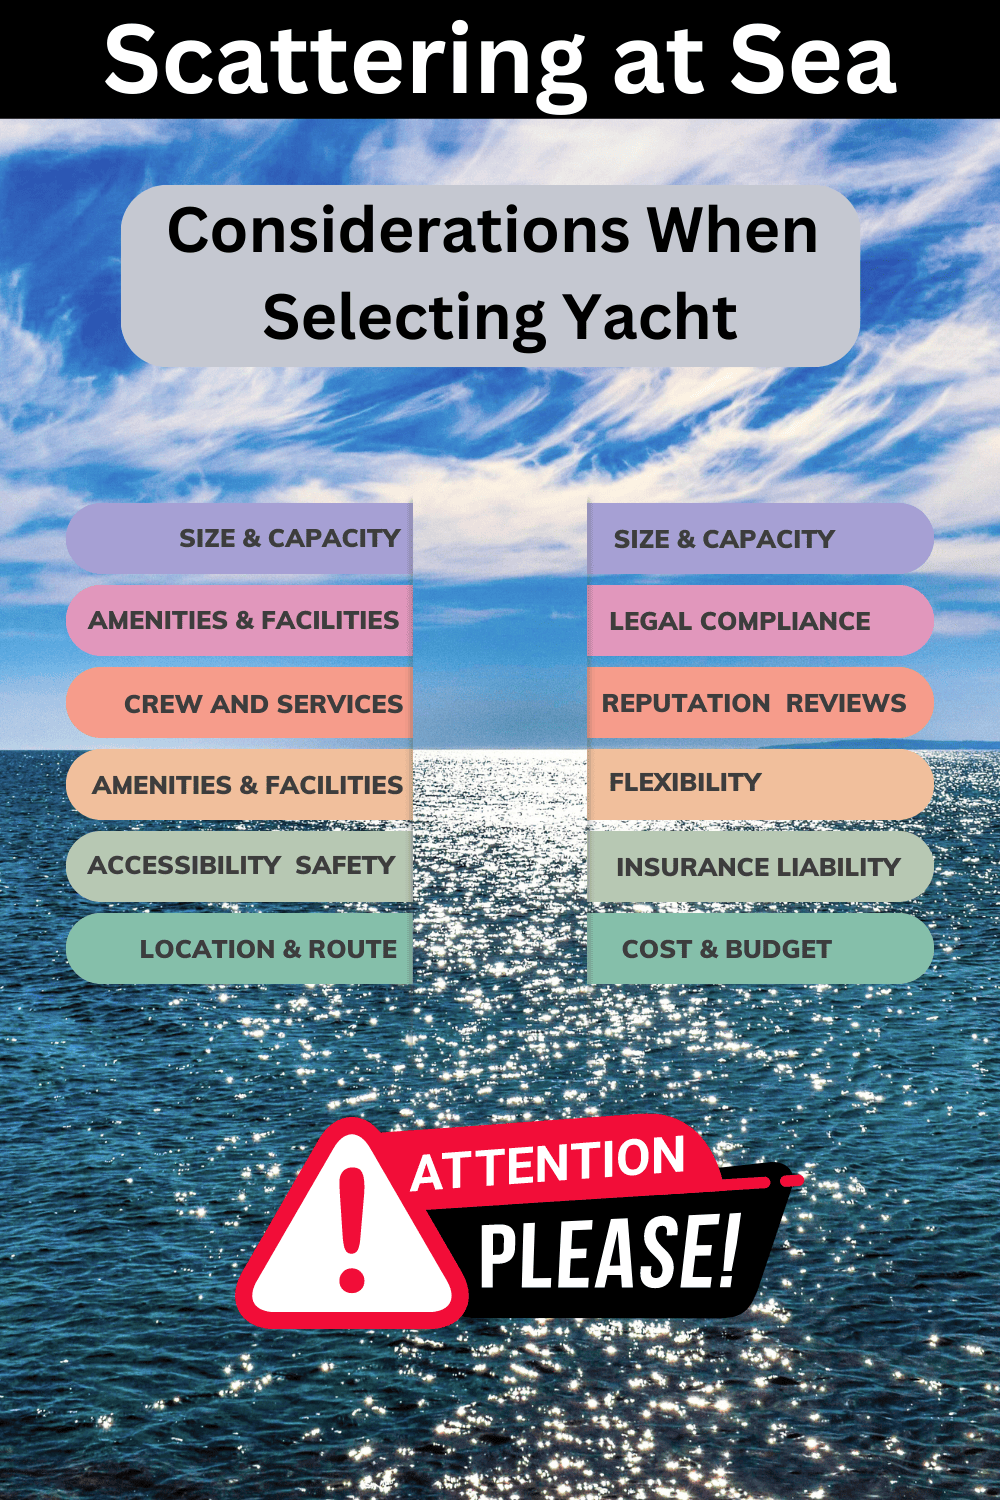 Selecting a Yacht for Sea Burial